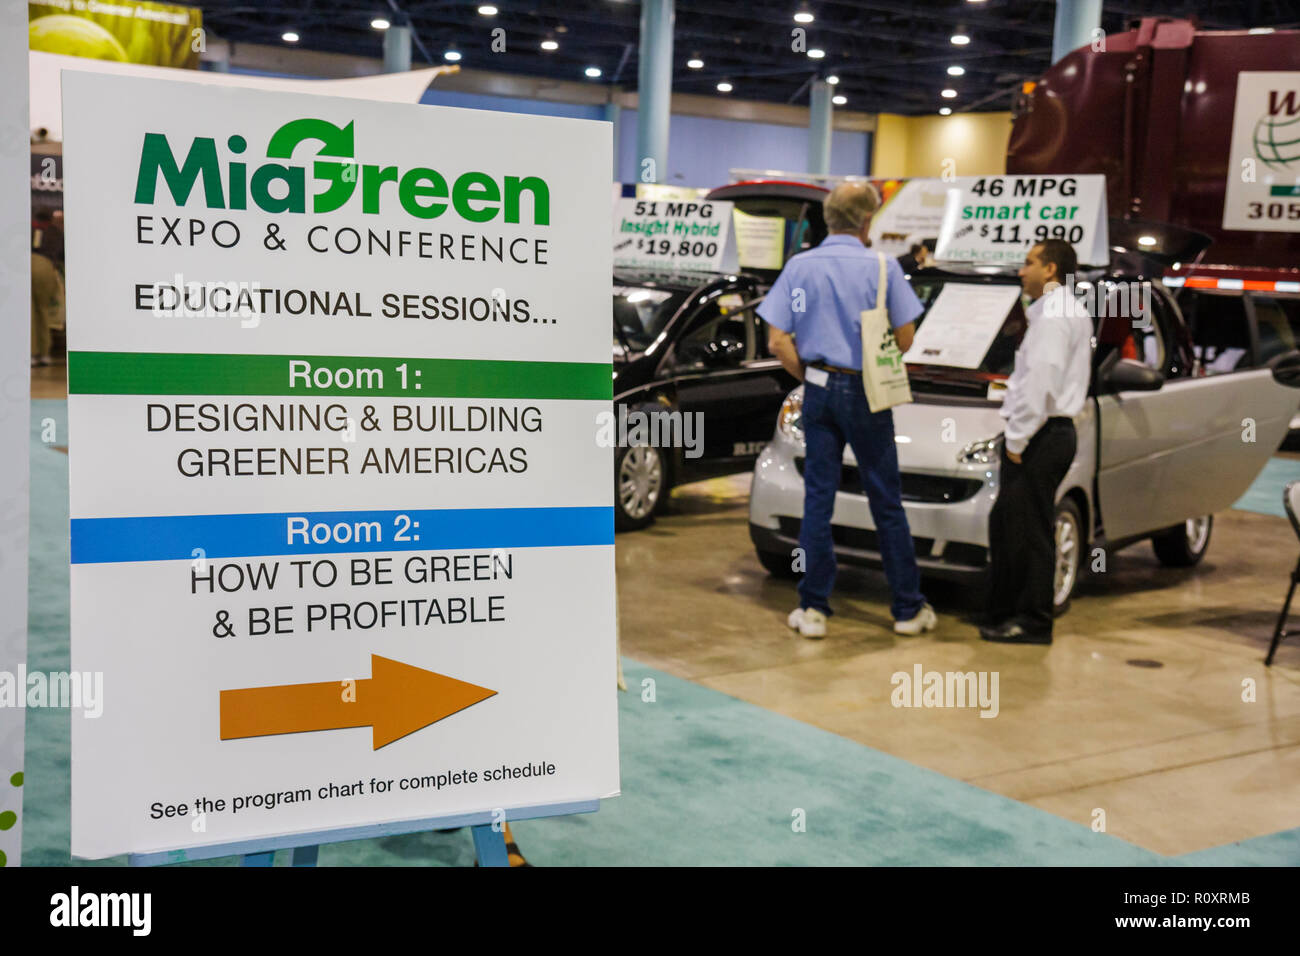 Miami Beach Florida,Convention Center,centre,MiaGreen Expo & Conference,green conservation,sustainable,trade show,energy efficient,exhibitor,sign,semi Stock Photo